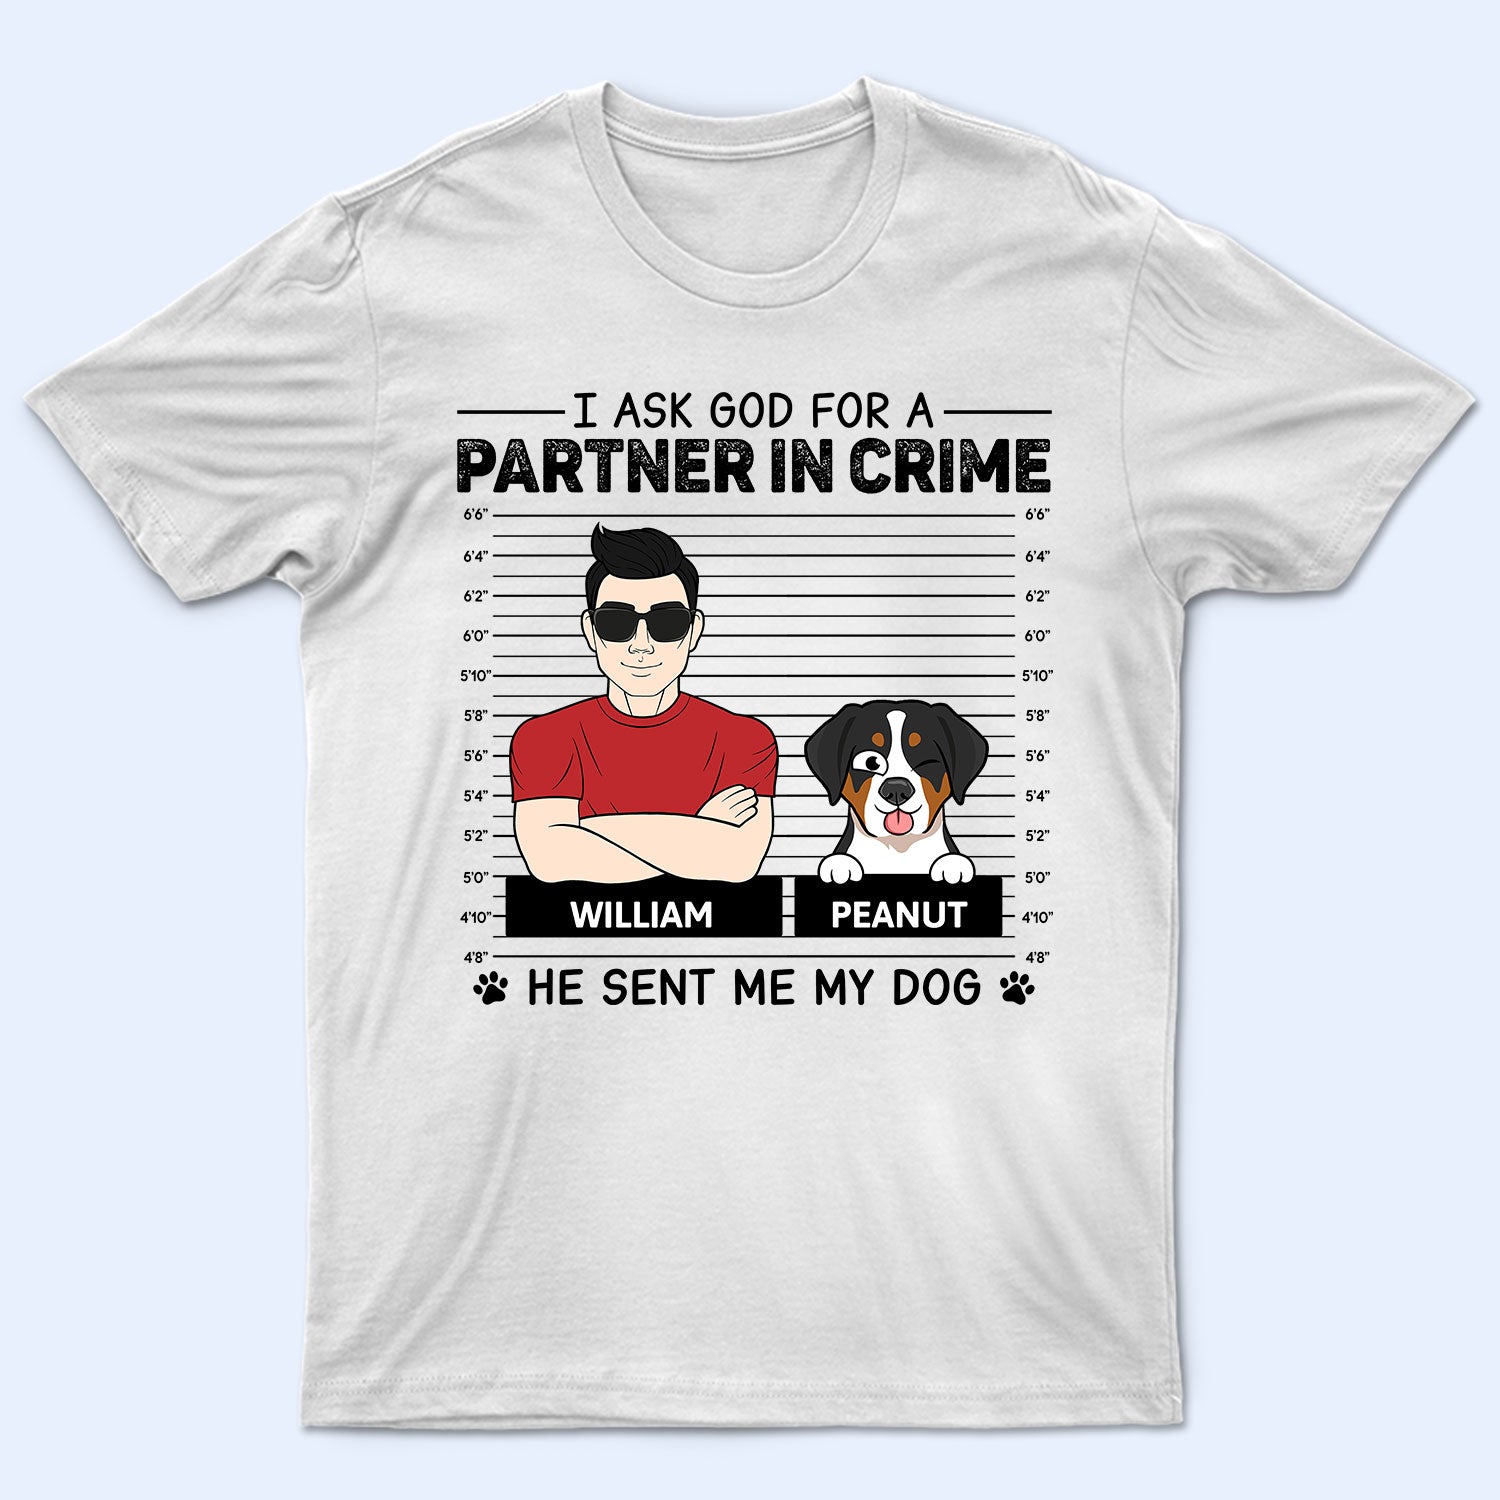 My Dogs Are My Partners In Crime - Personalized T Shirt